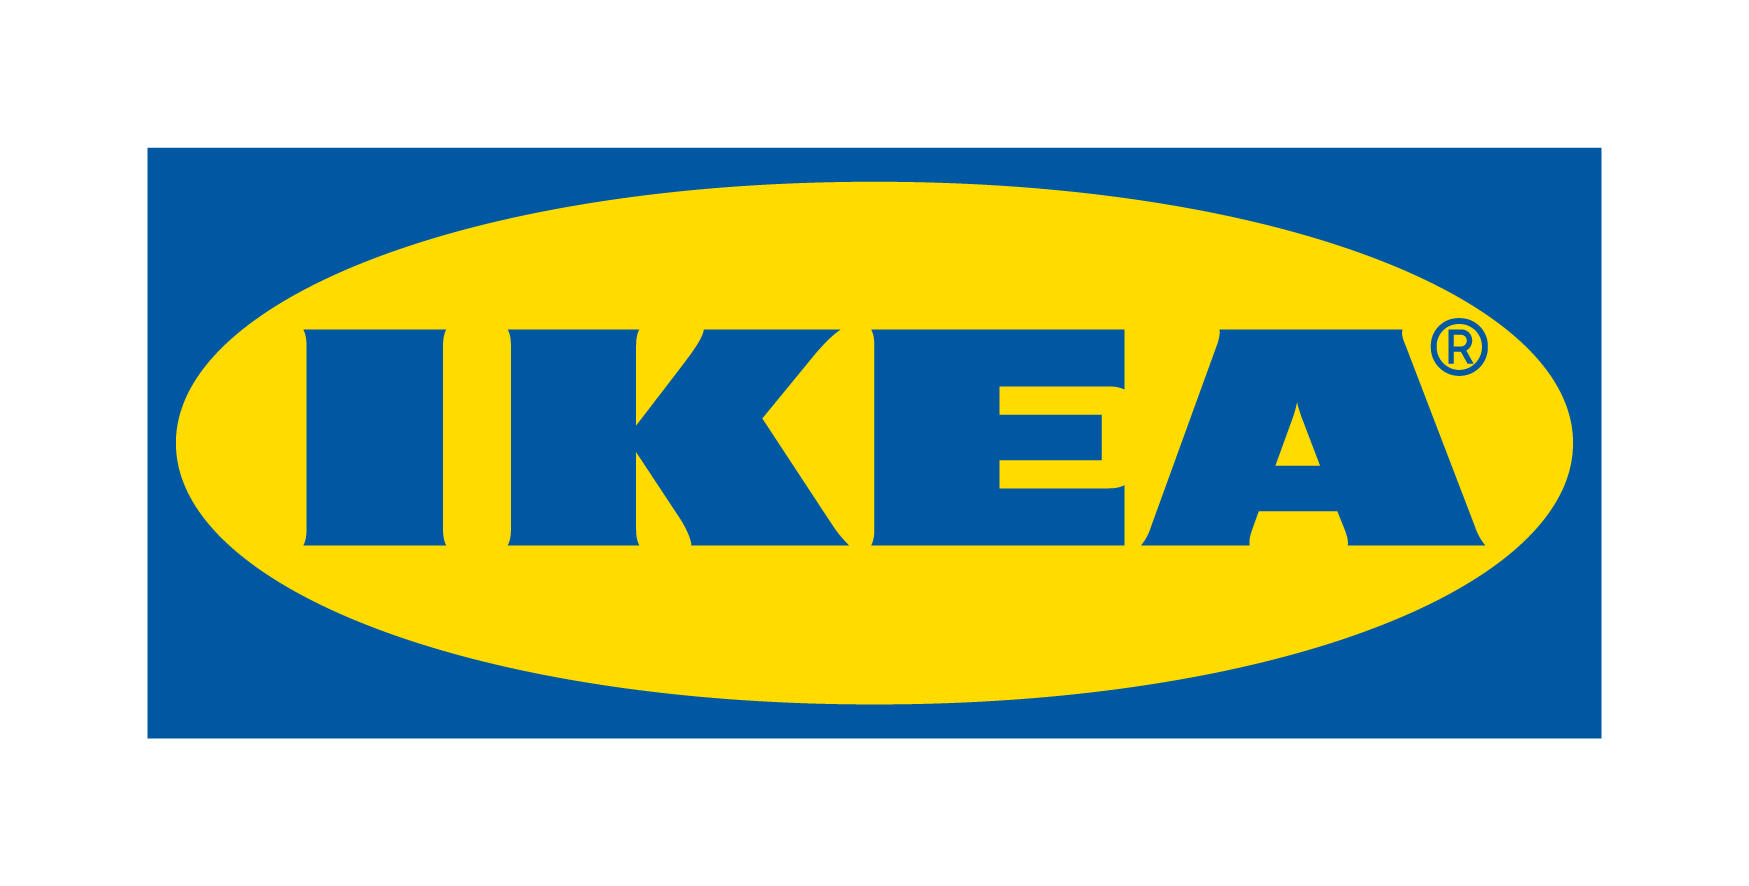 careers at inter ikea group